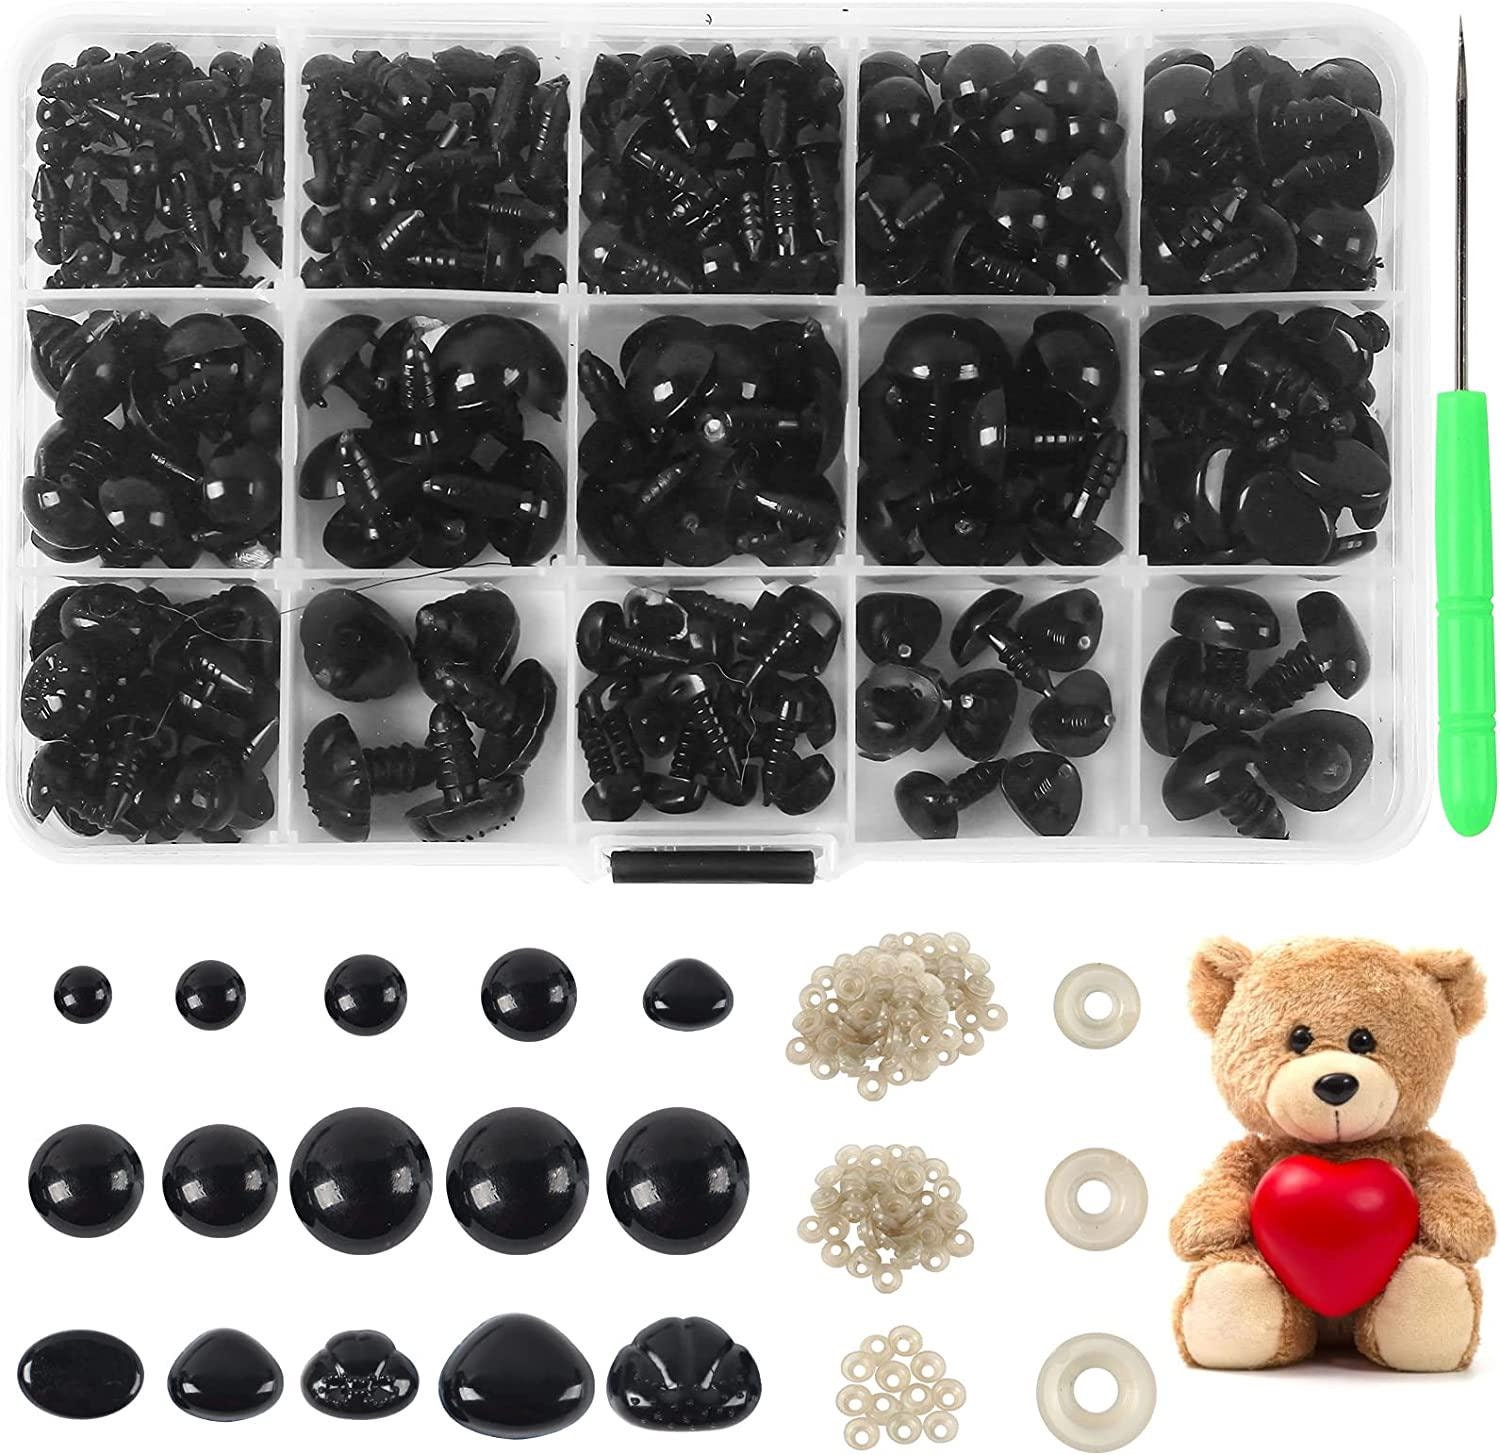 Yexixsr 566Pcs Safety Eyes and Noses for Amigurumi Stuffed Crochet Eyes with Washers Craft Doll Eyes and Nose for Teddy Bear Crochet Toy Stuffed